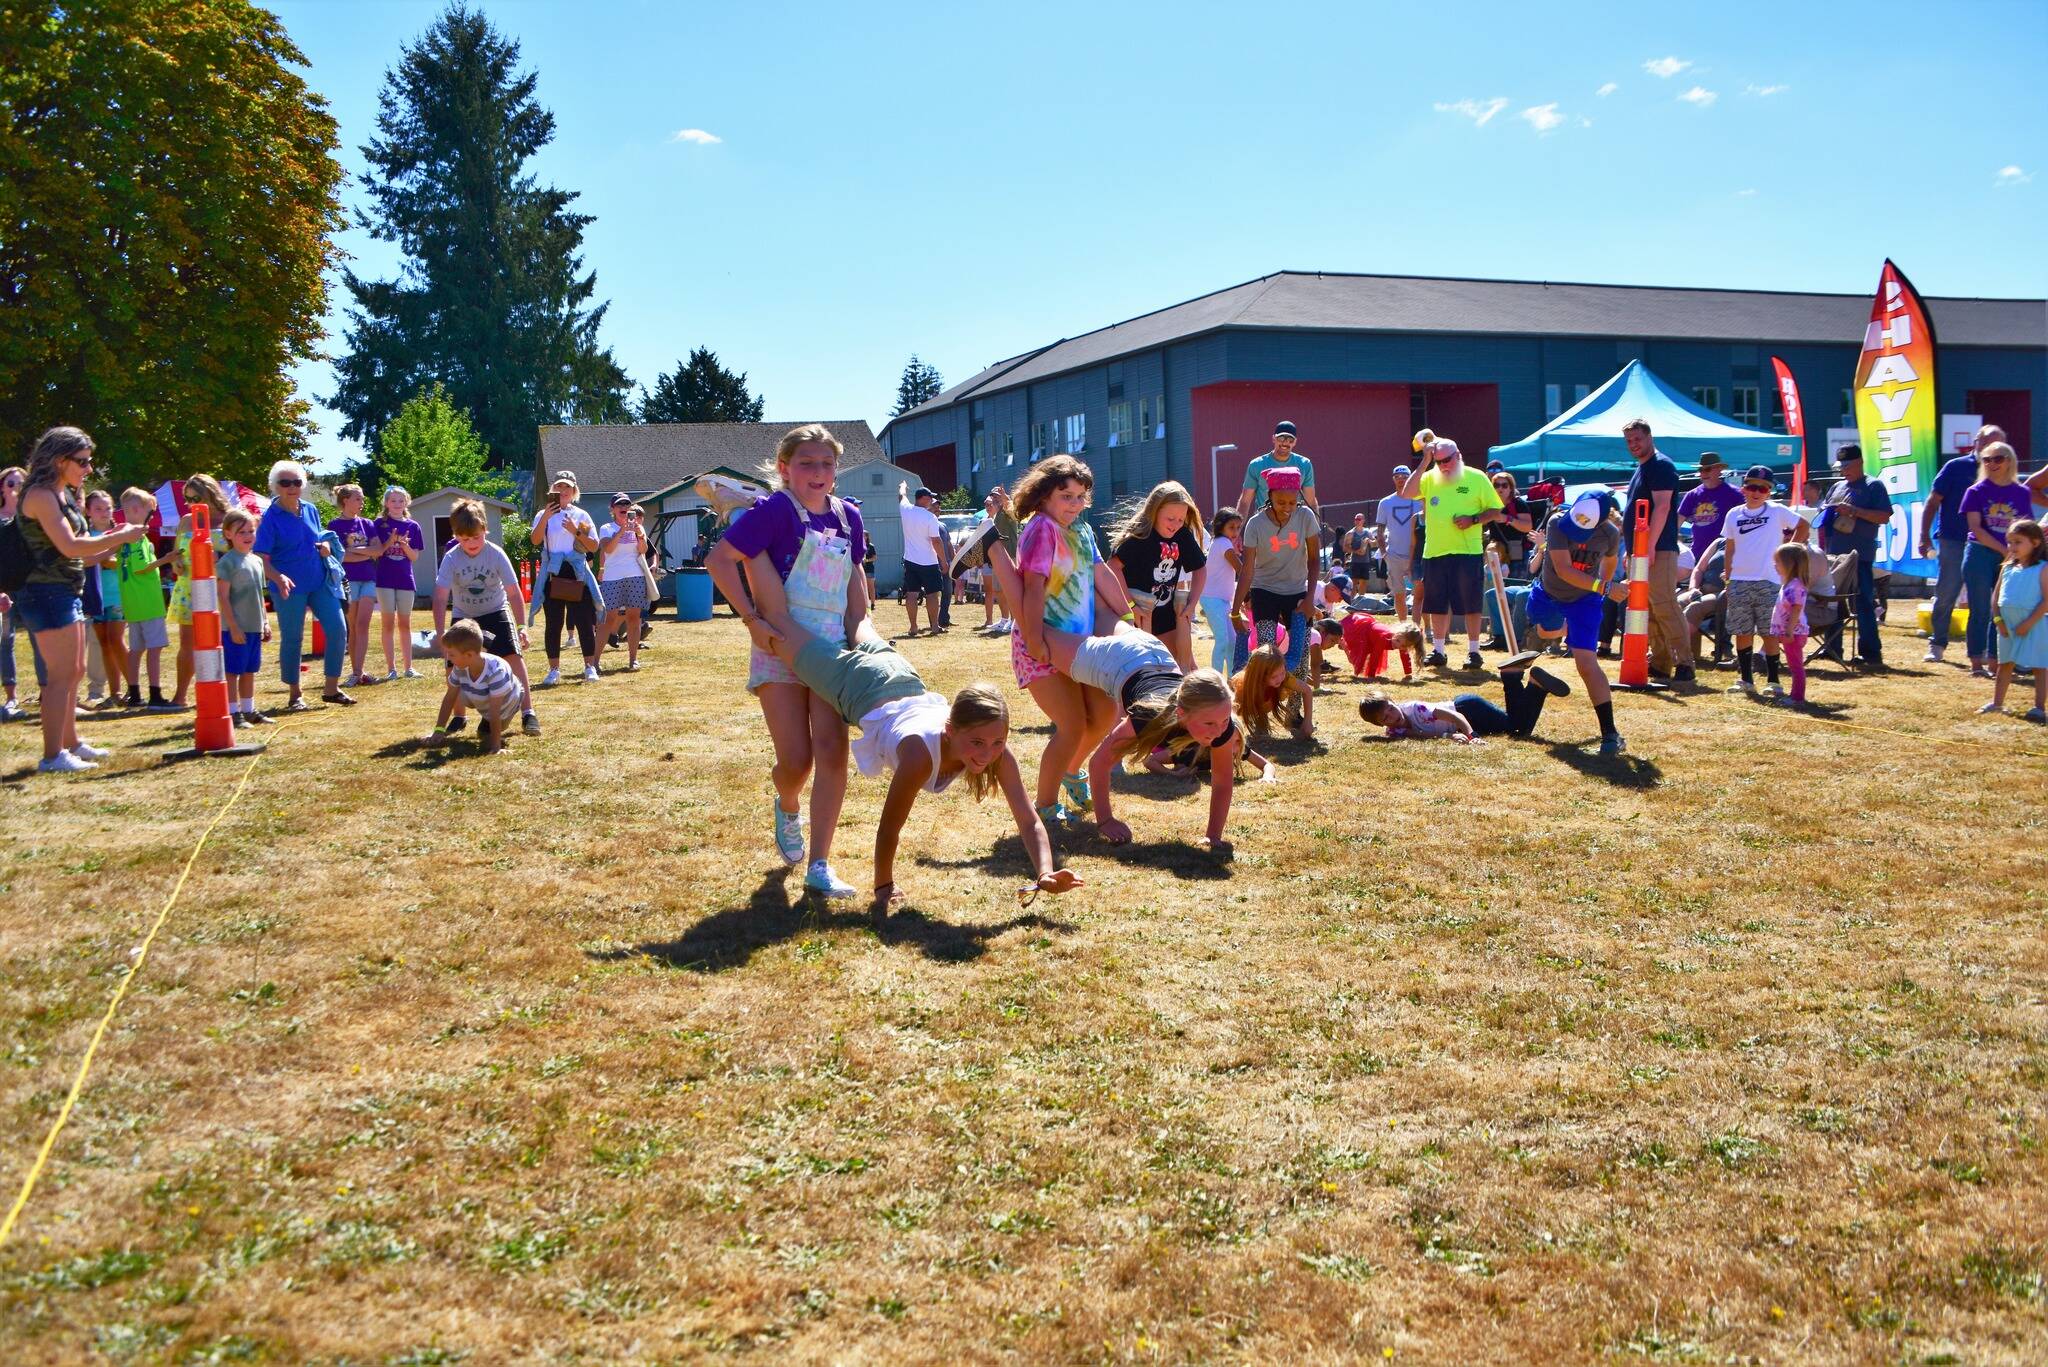 Photo Courtesy of Debbie Page
Kids playing field games during Black Diamond Labor Days.